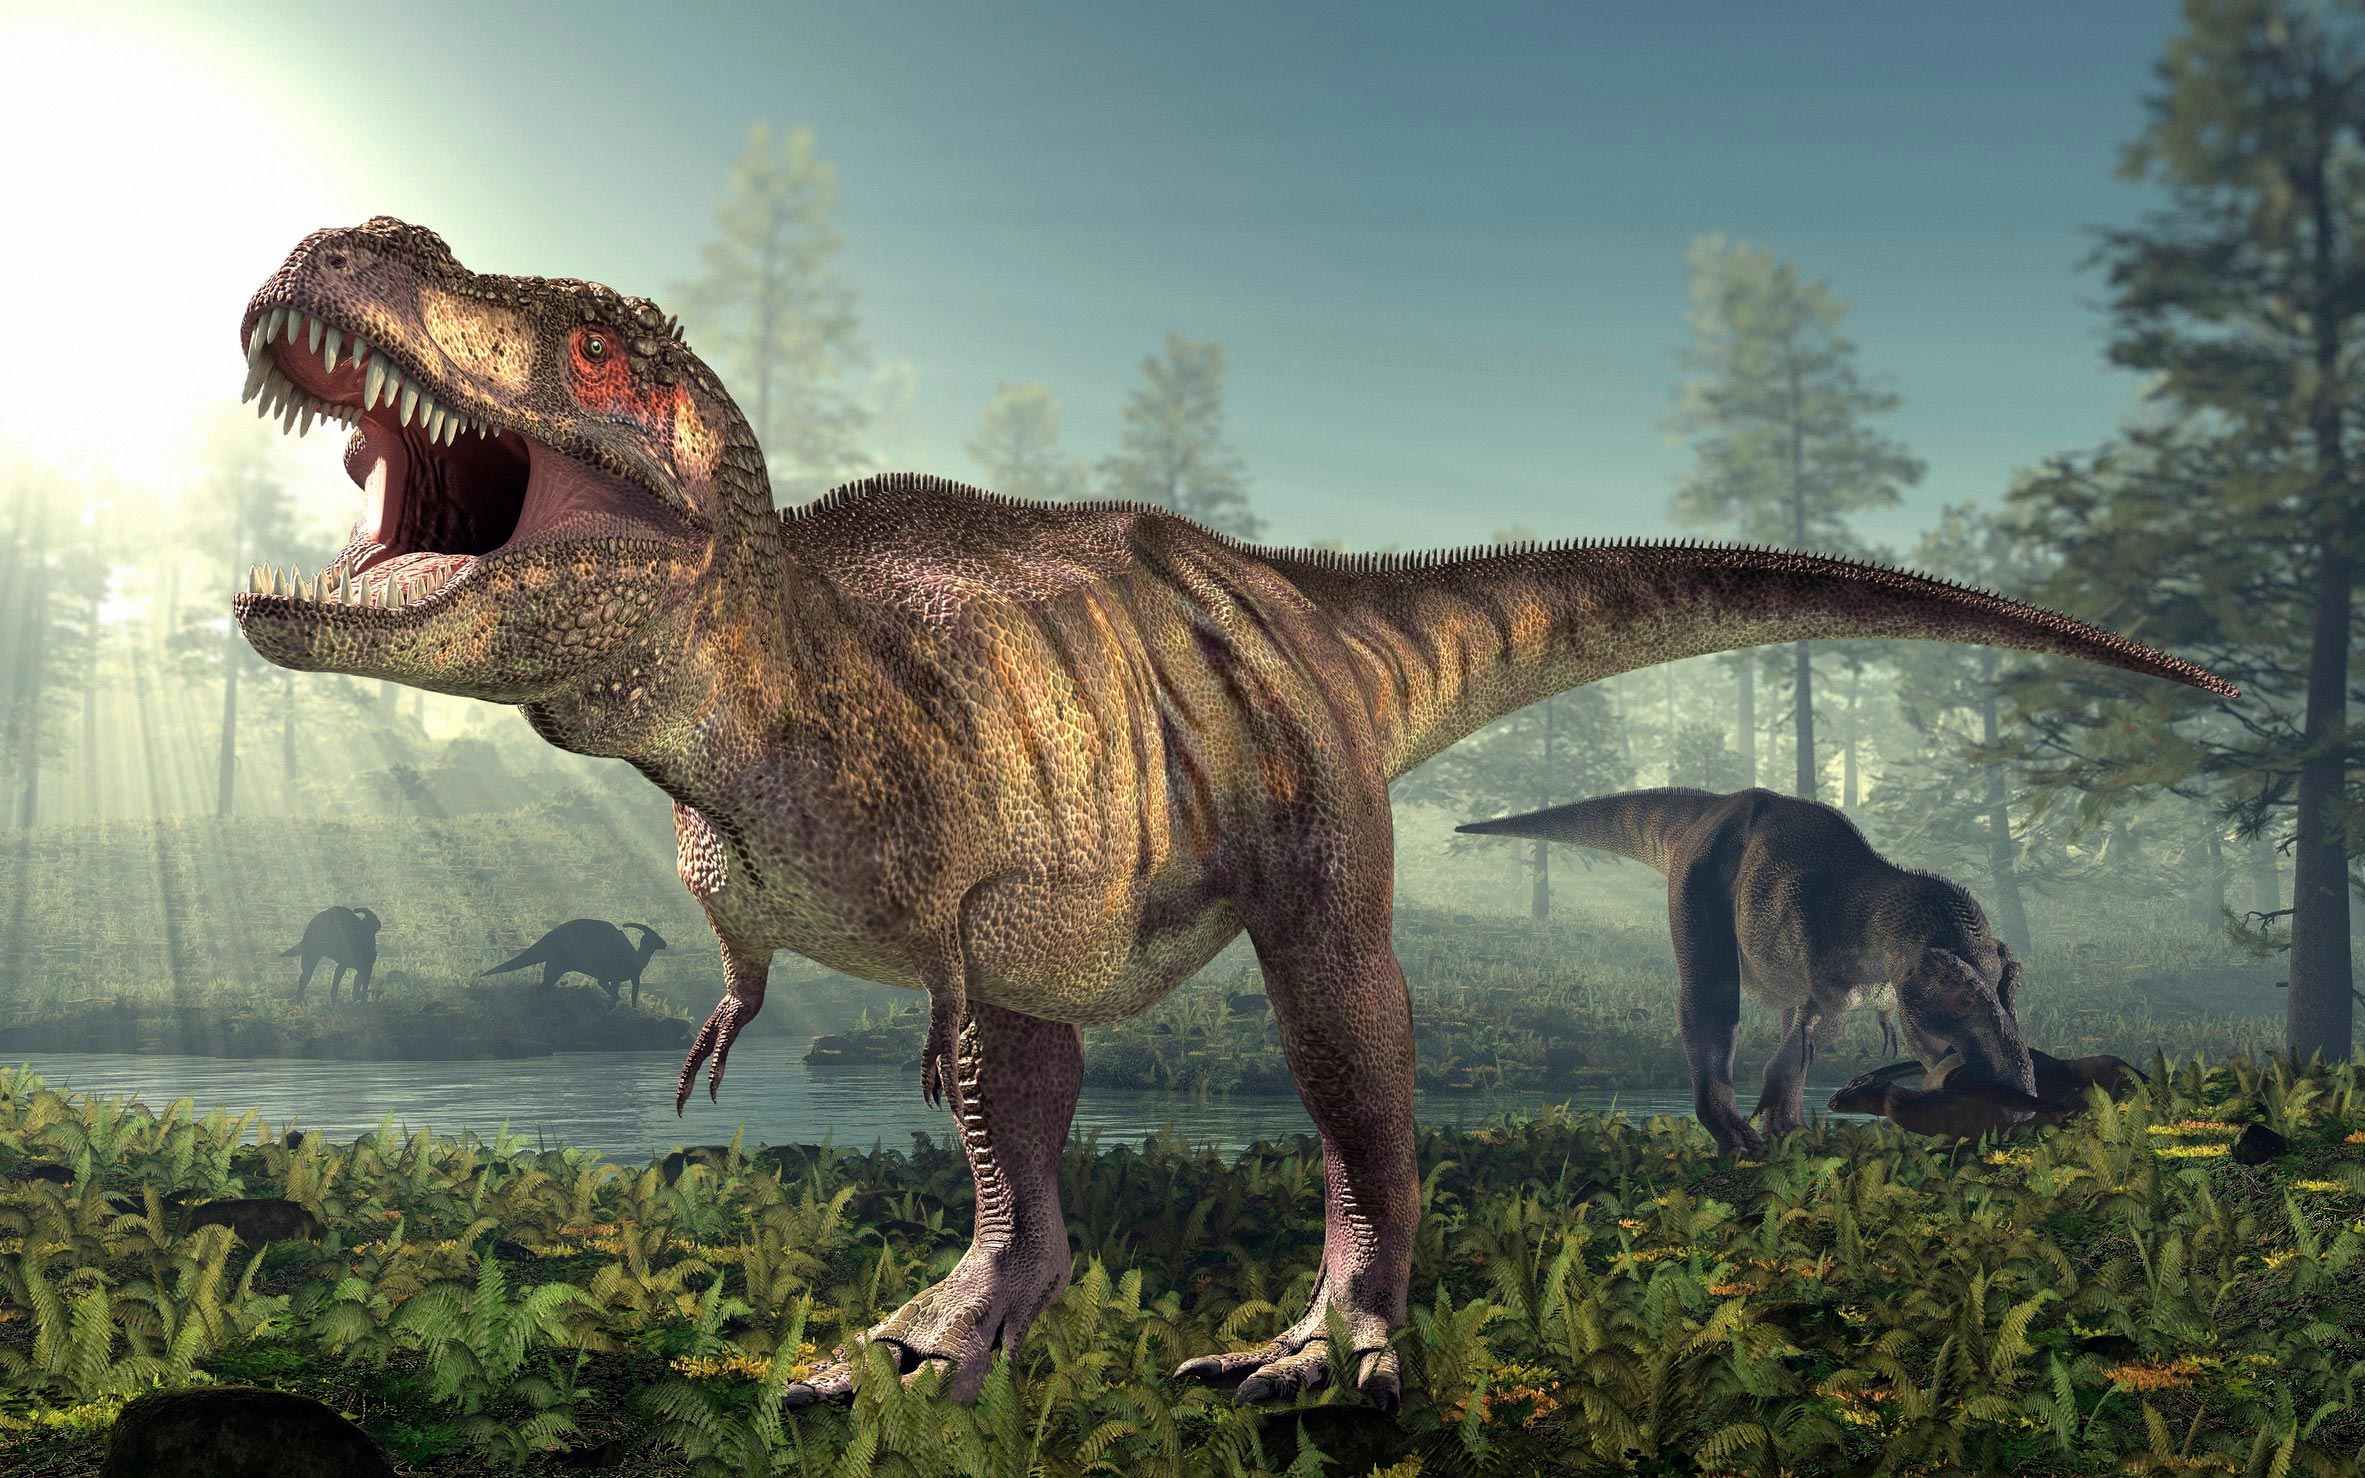 Growing Up Tyrannosaurus Rex: Researchers Learn More About Teen-Age T.Rex